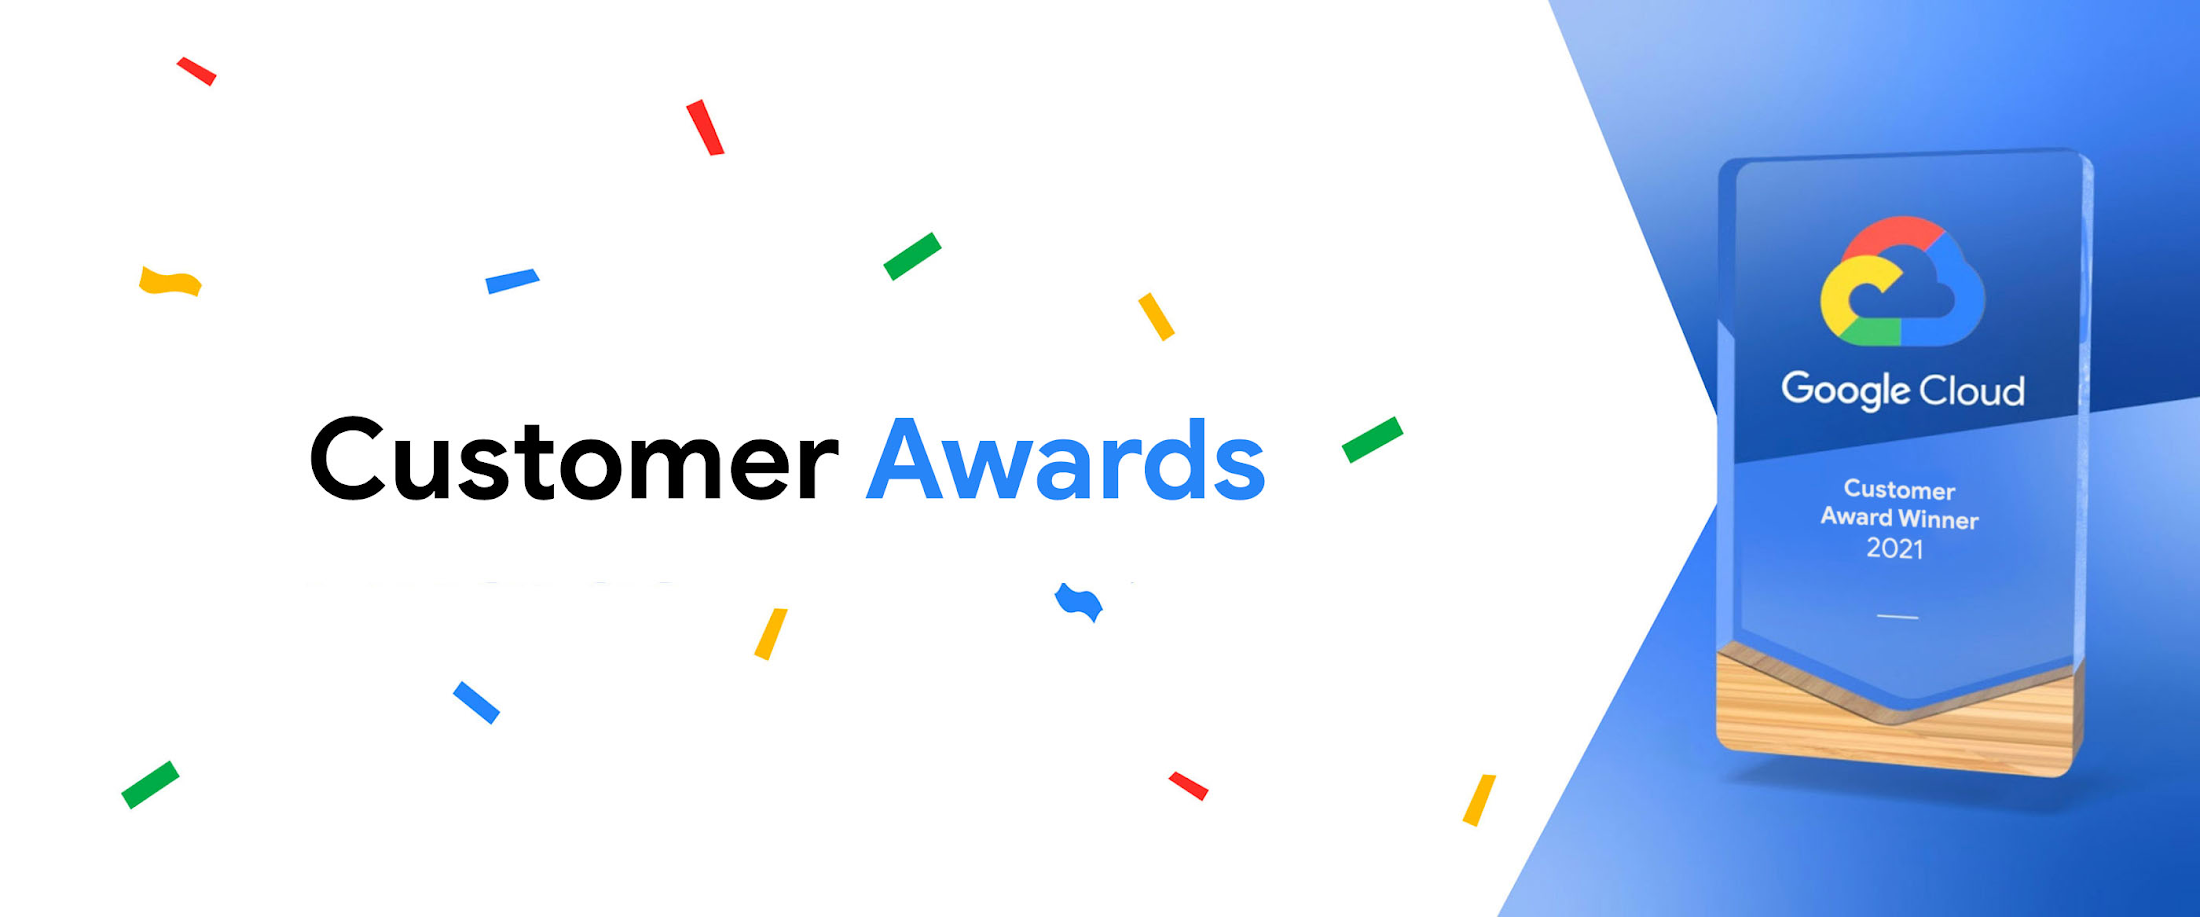 Equifax wins Diversity, Equity, and Inclusion and Financial Services Google Cloud Customer Awards